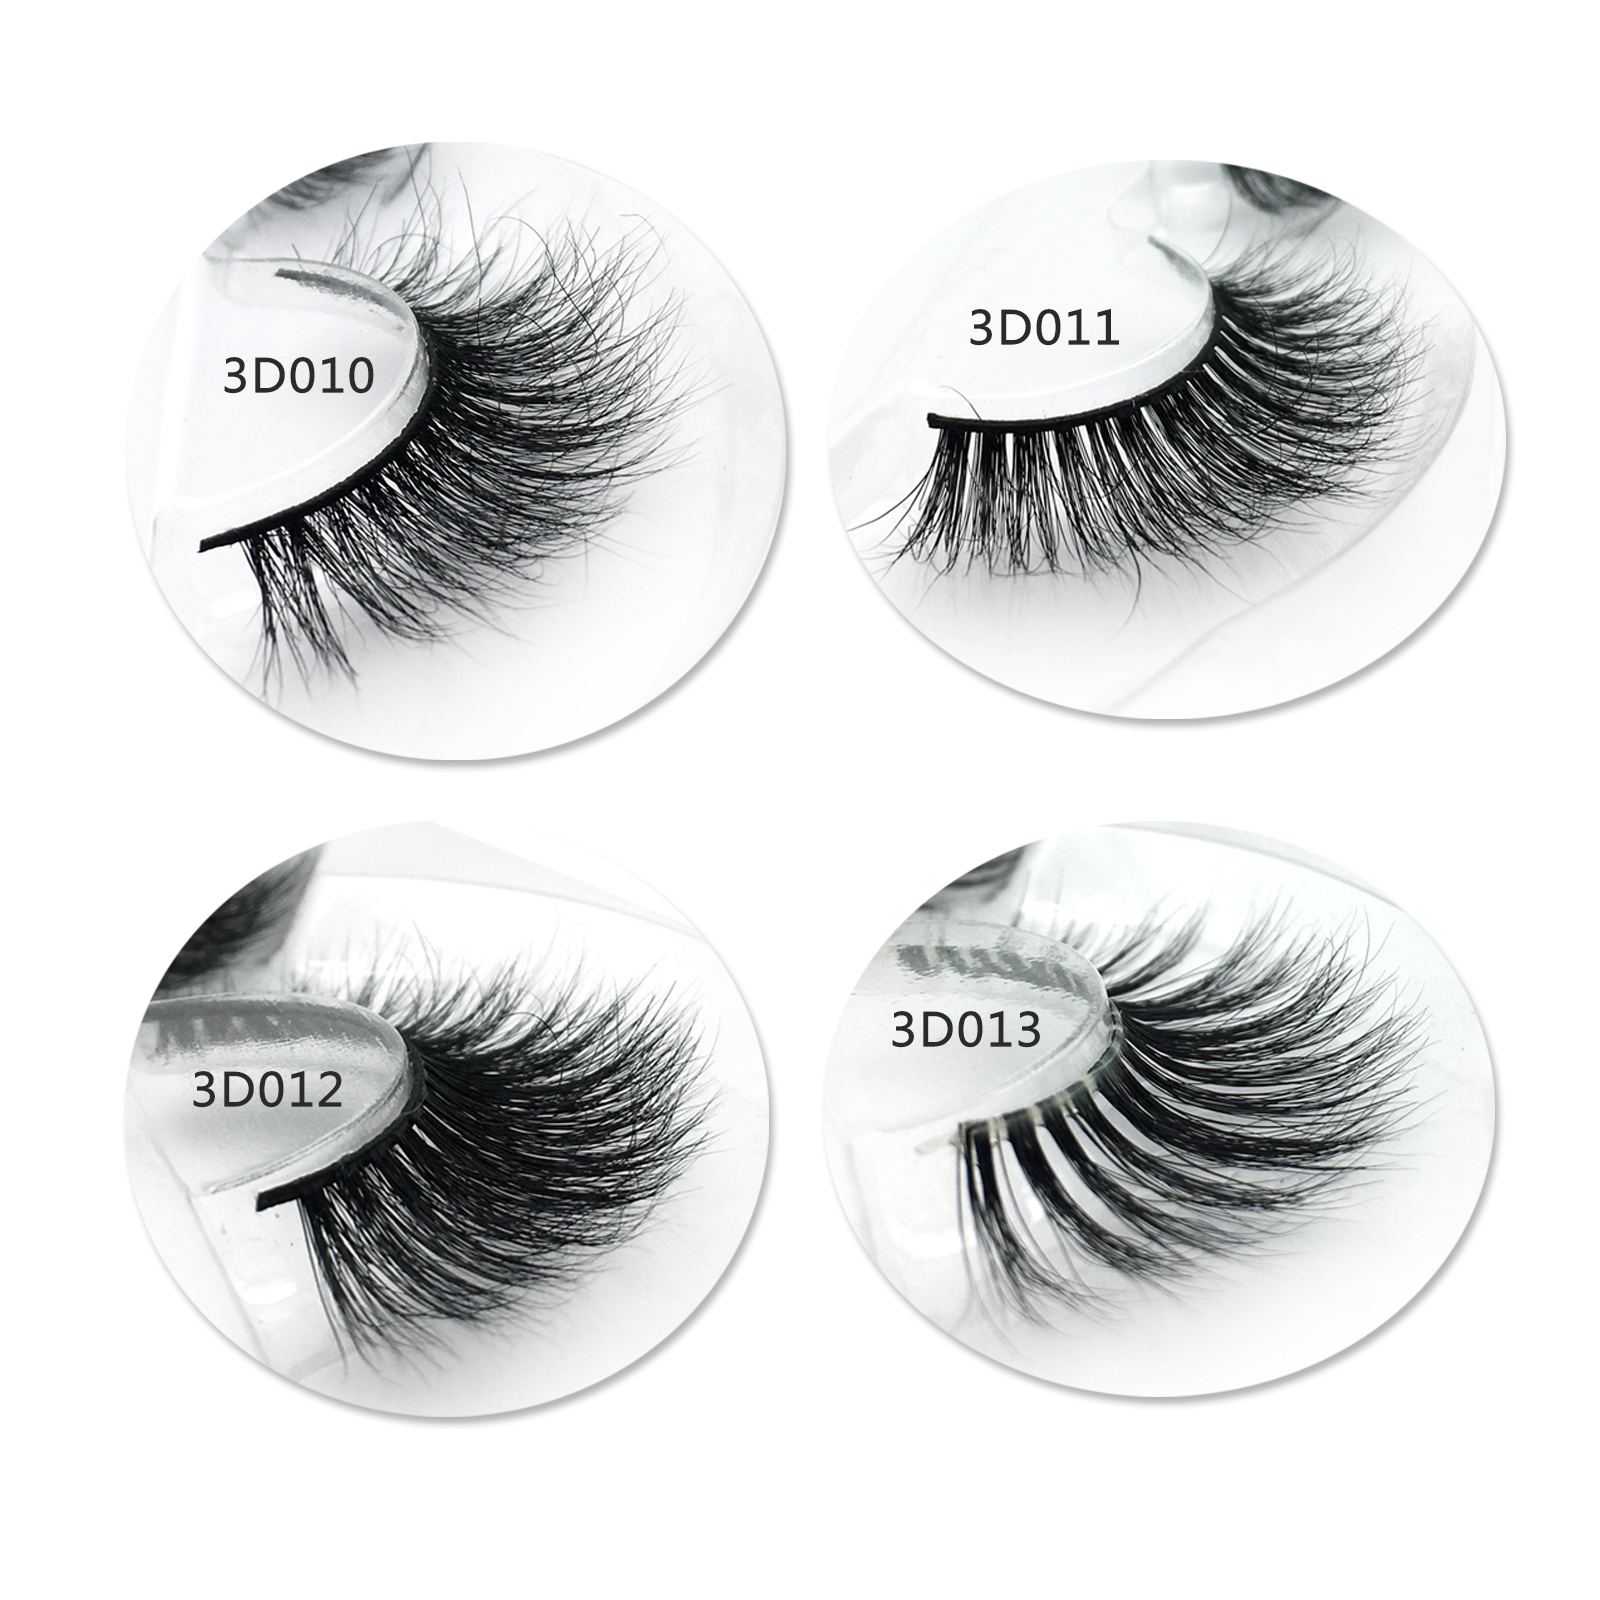 Best Eyelash Supplier Sell Premium 3D Real Mink Fur Strip Eyelashes with Customized Box in the US  YY79